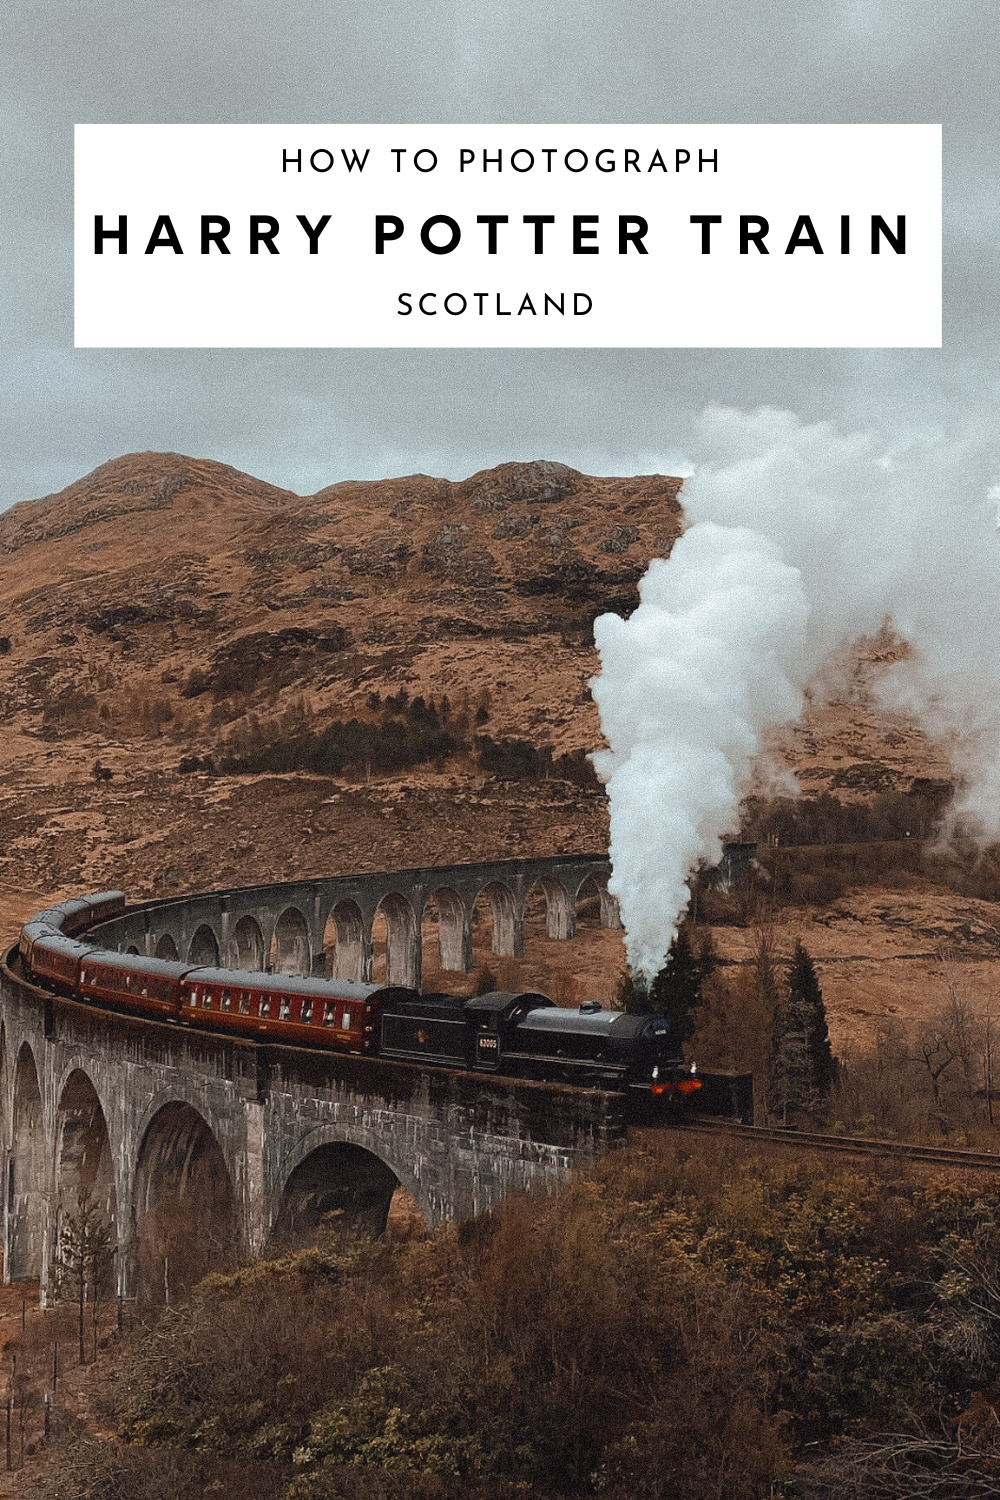 Photograph The Harry Potter Train at Glenfinnan Viaduct.png